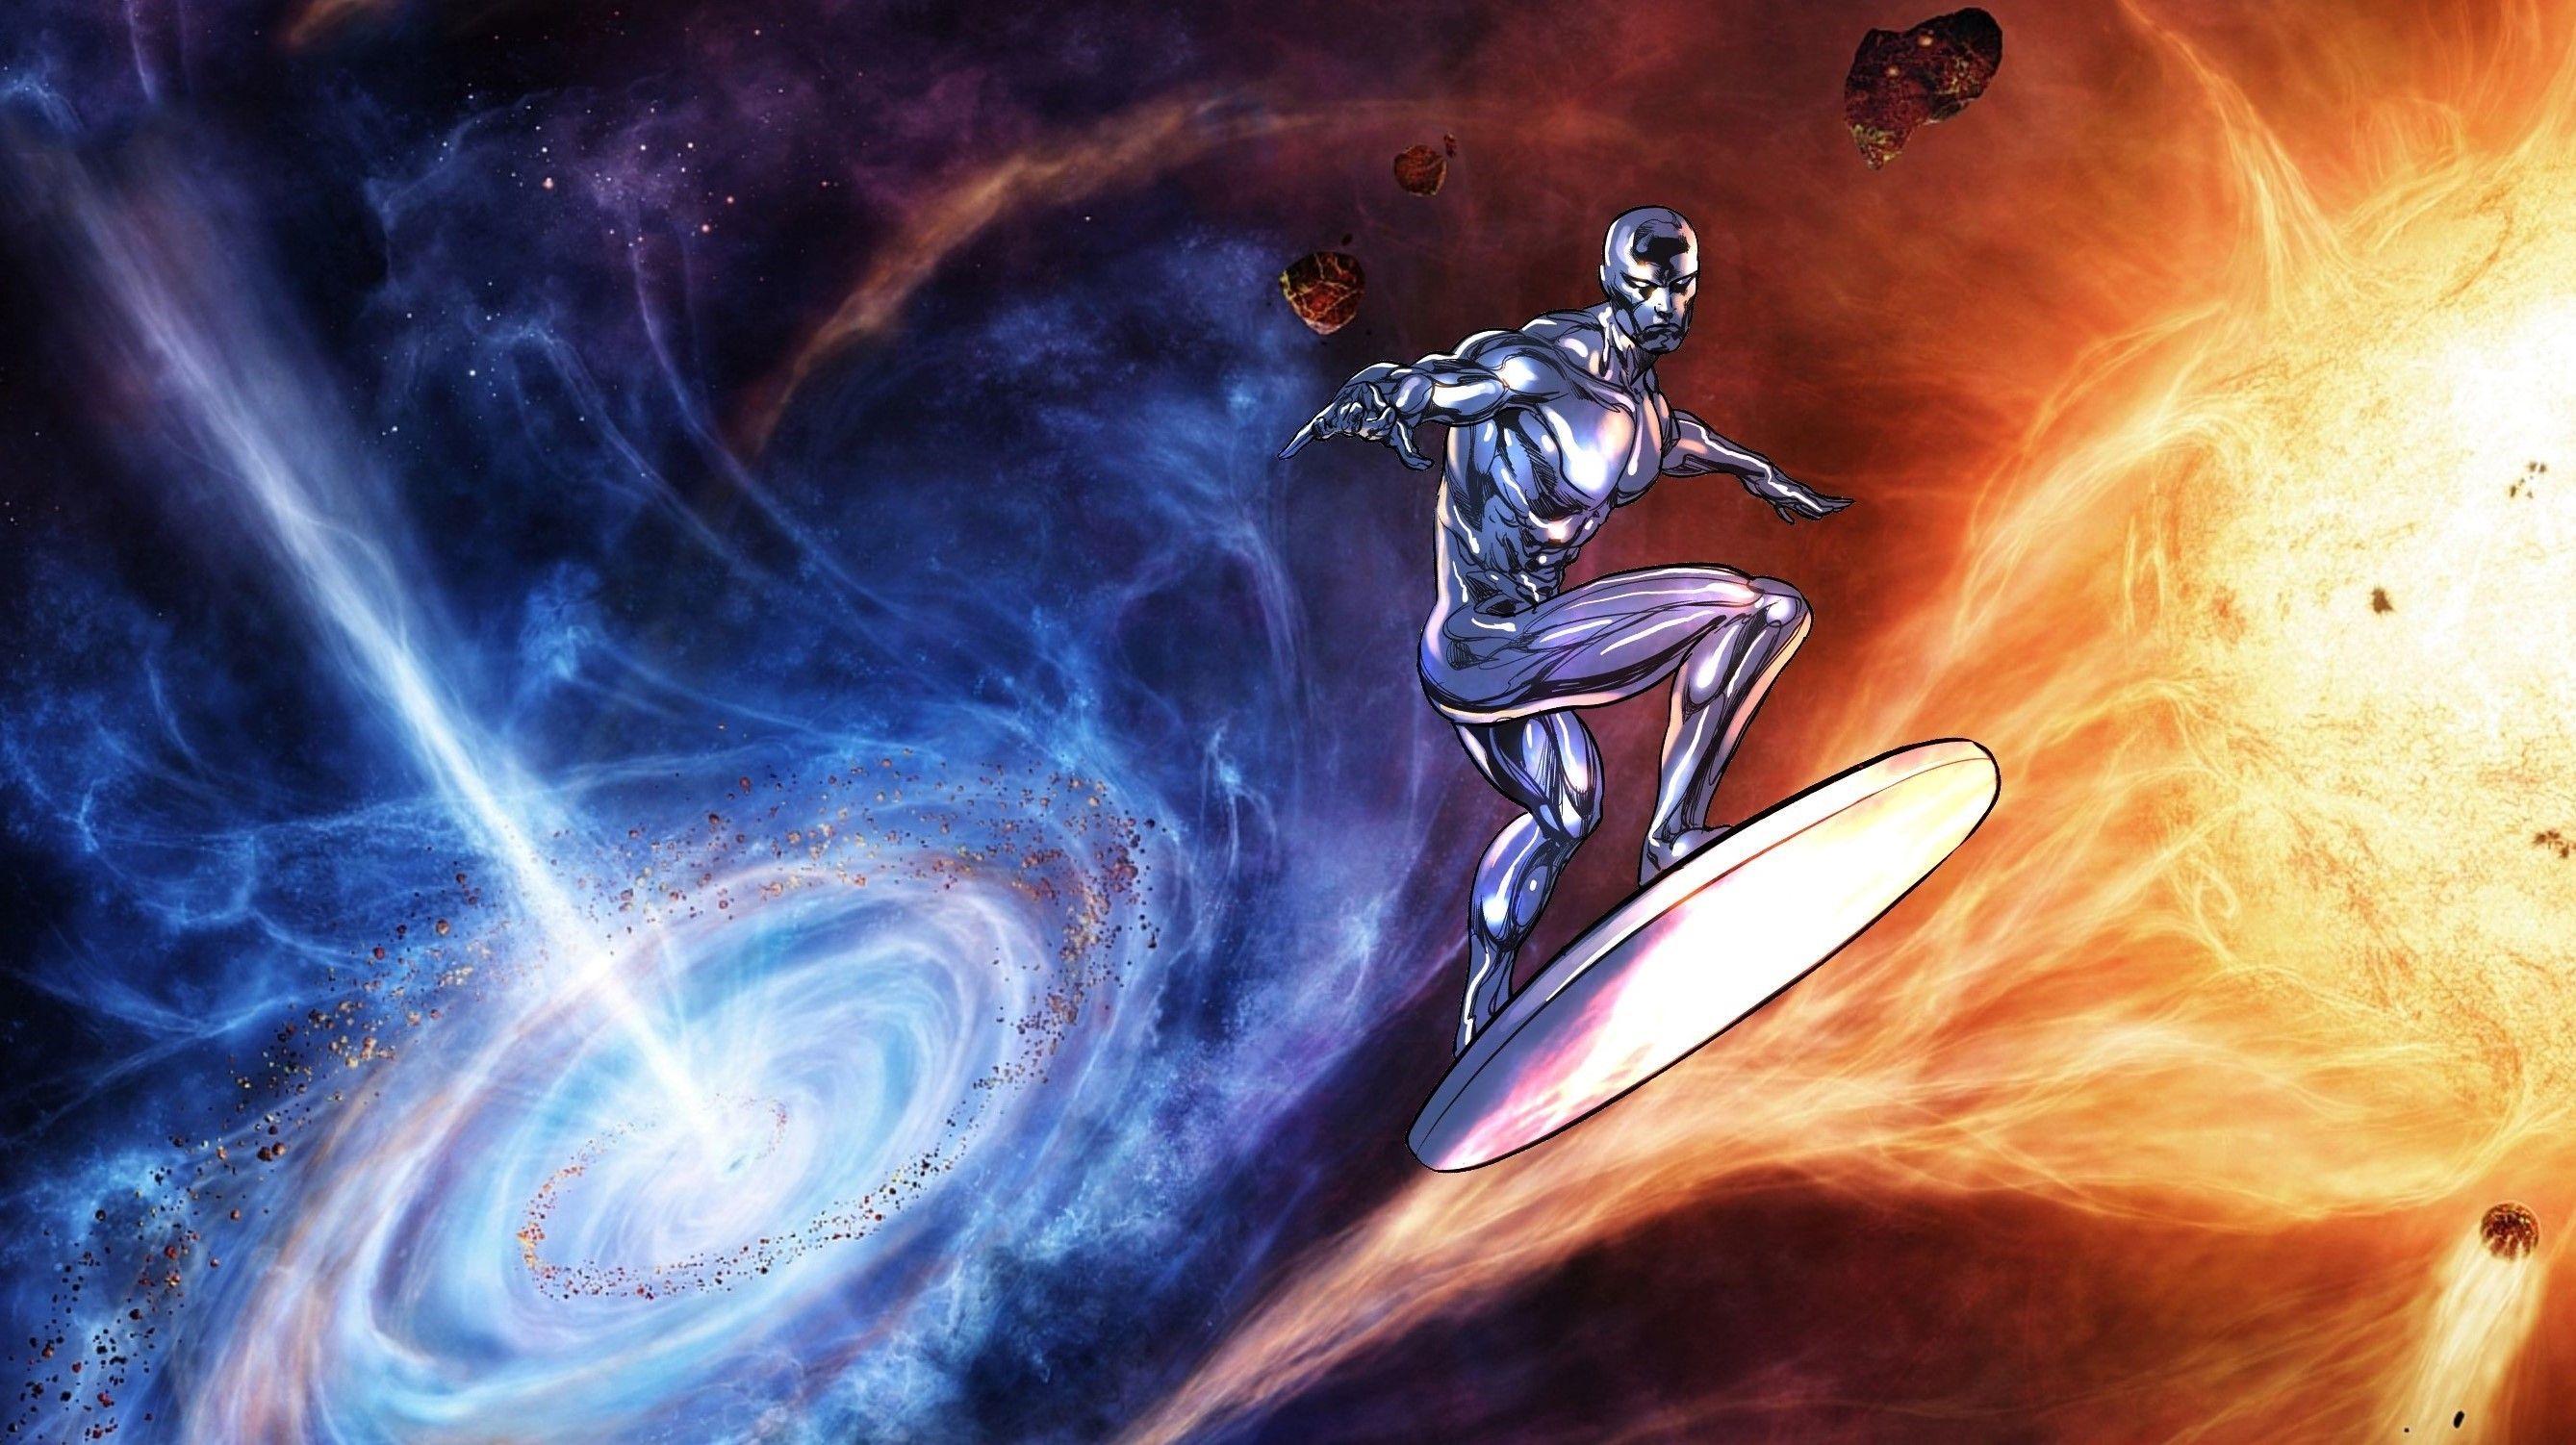 Silver Surfer Wallpapers - Top Free Silver Surfer Backgrounds ...